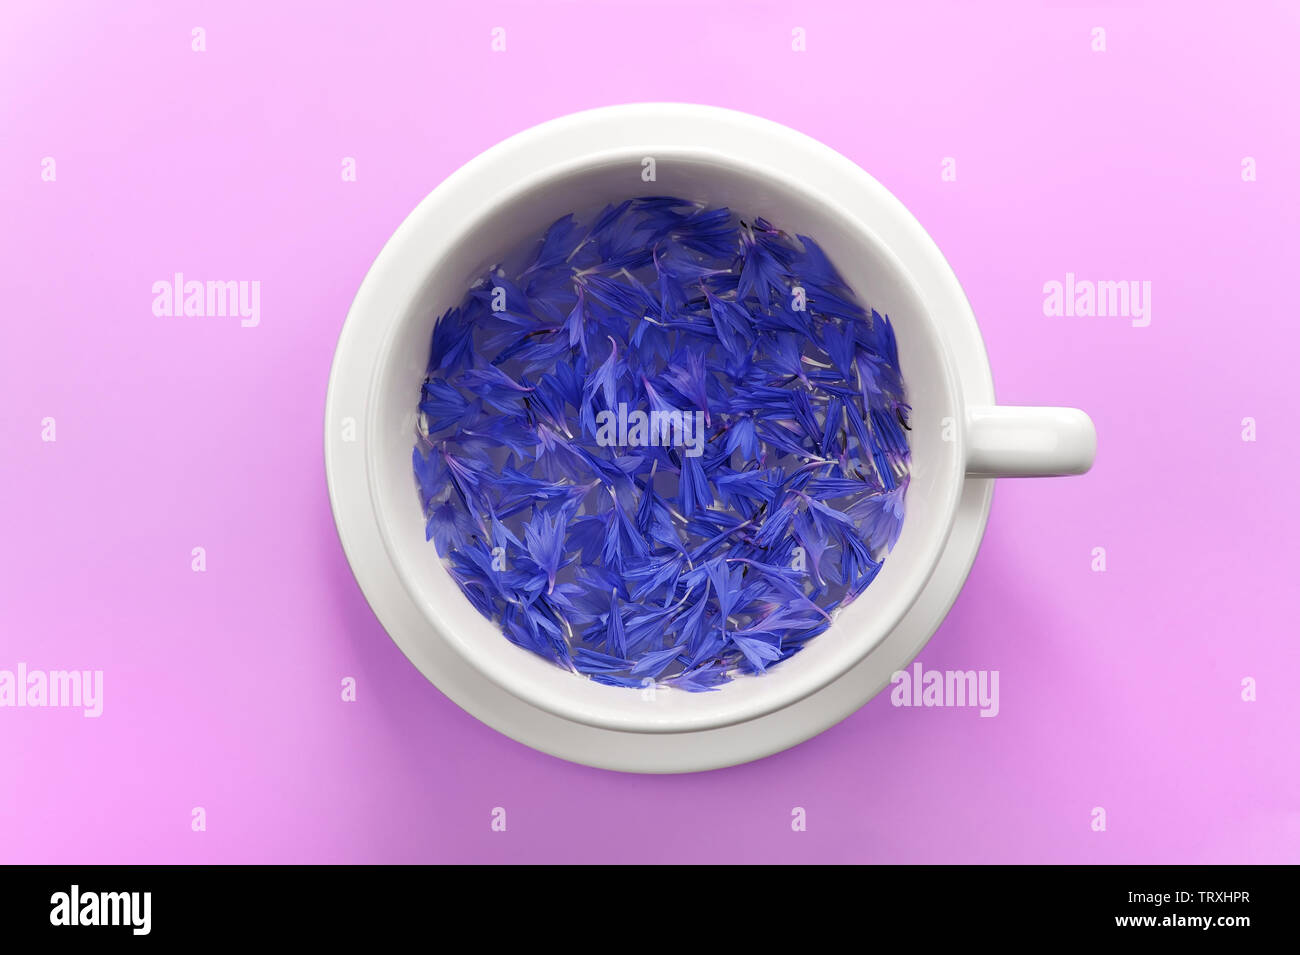 Creative layout made of cornflower petals floating in the water on  pink  background . Flat lay, concept. Abstract image for lettering, text or design Stock Photo